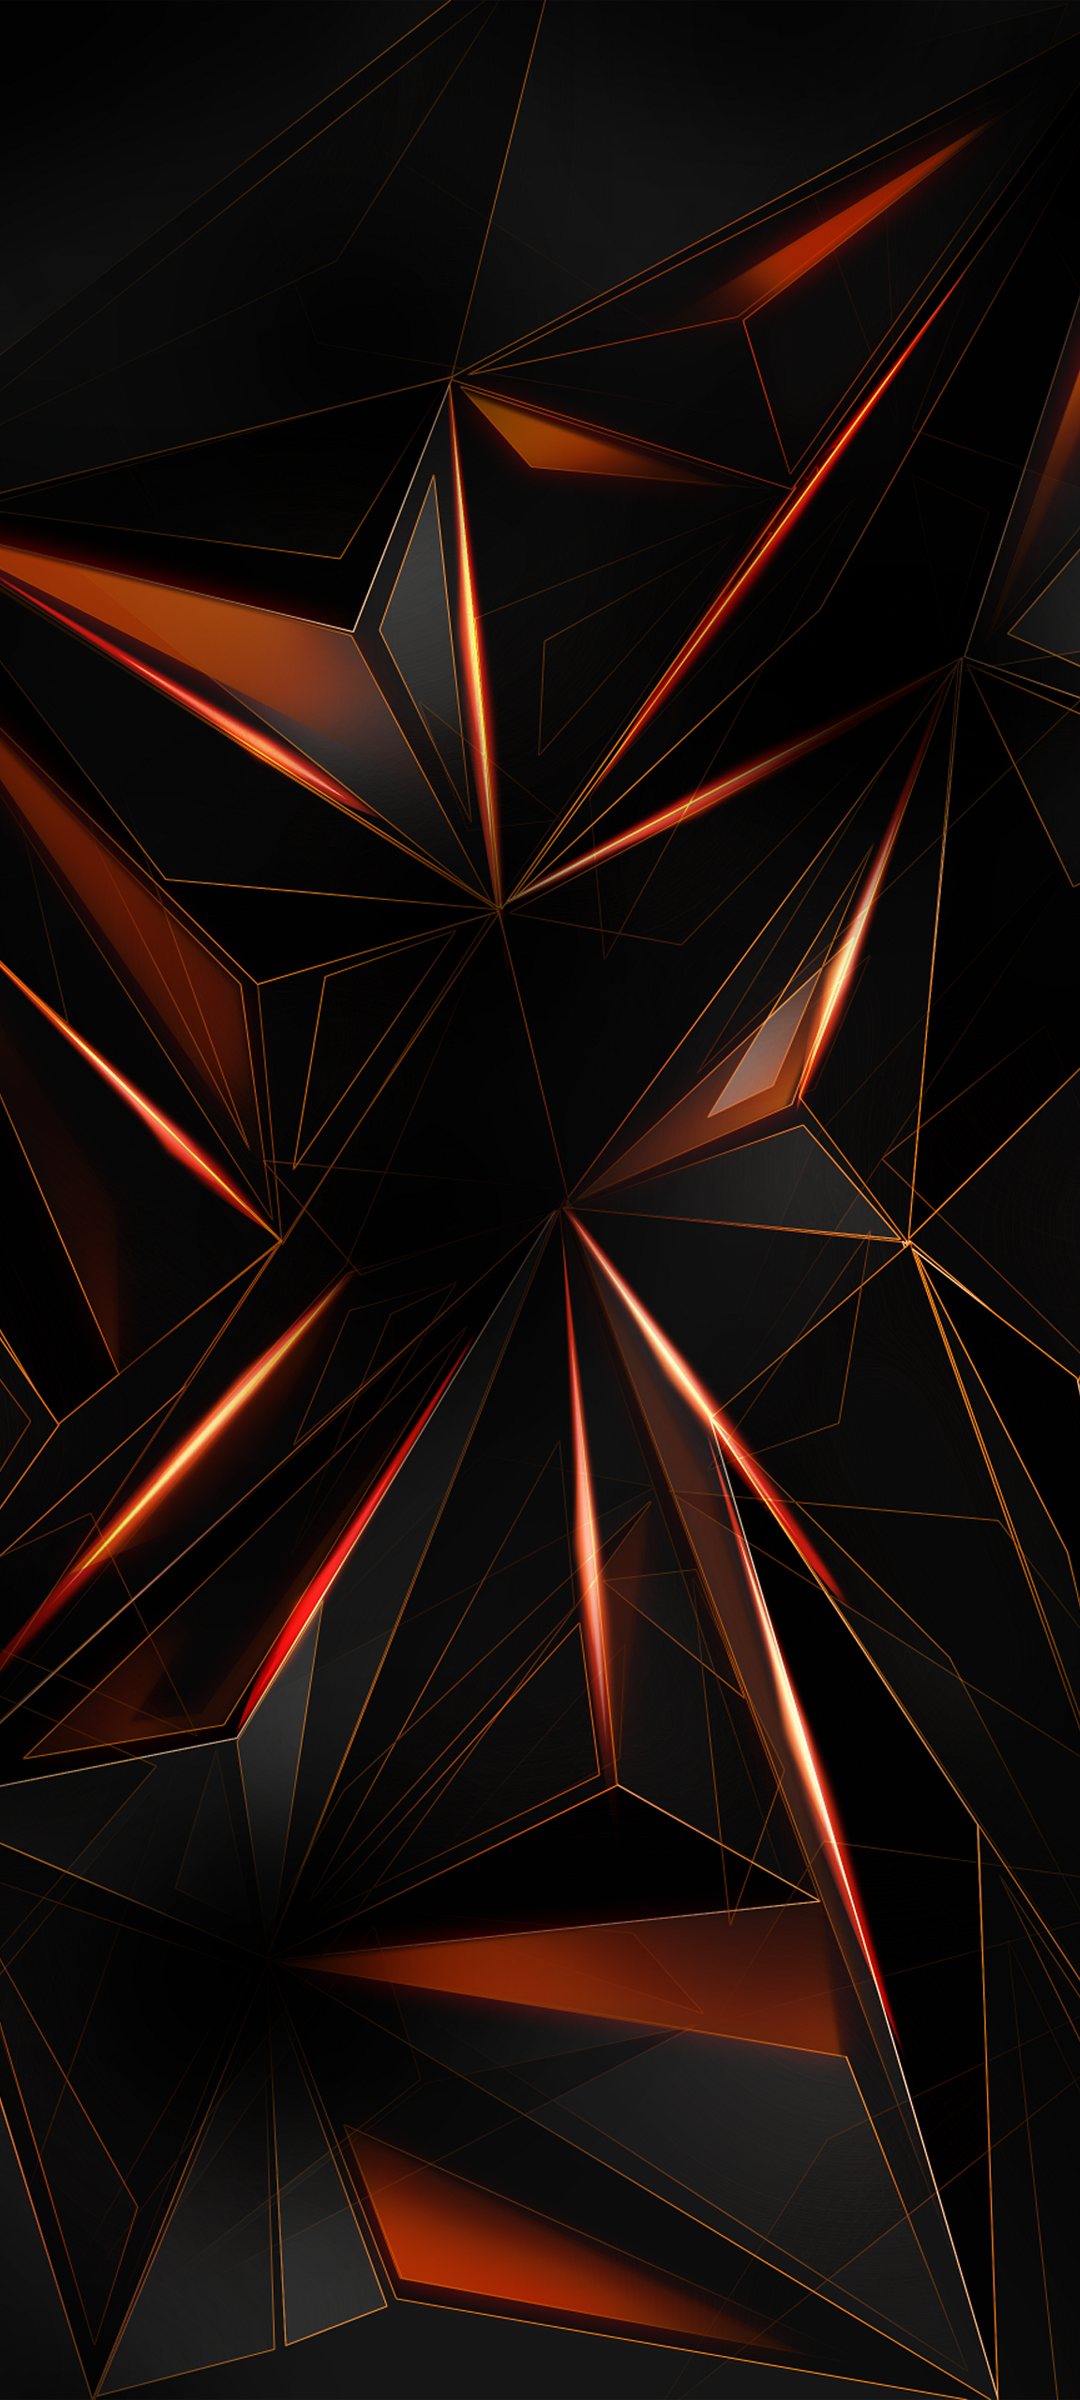 cool orange backgrounds for iphone